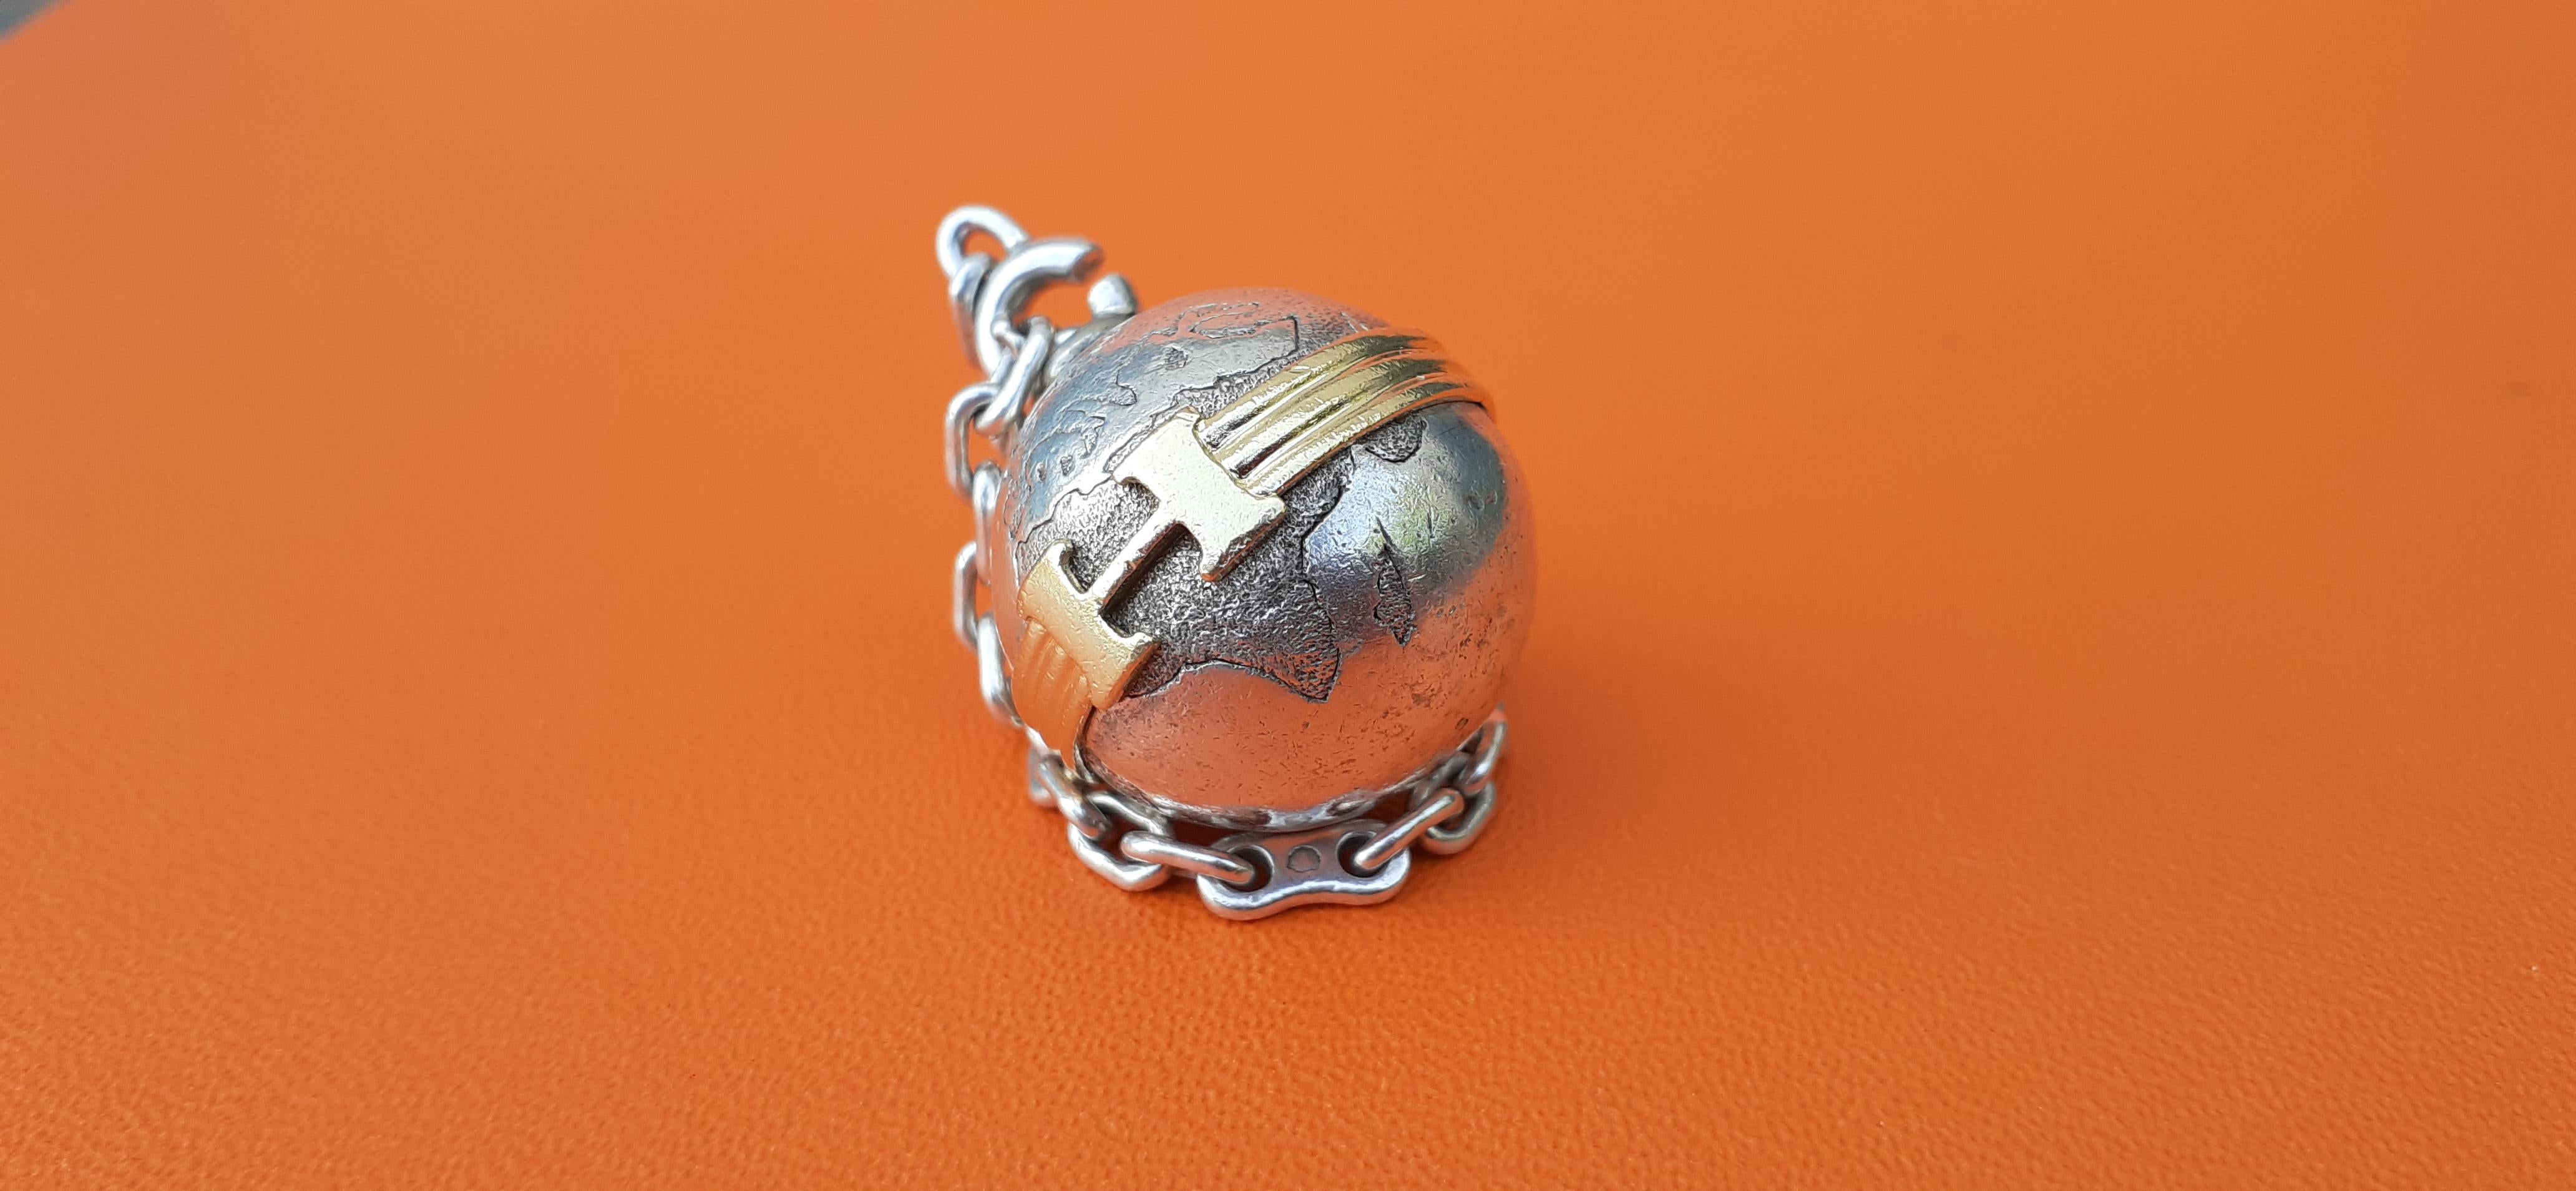 Rare Authentic Hermès Charm or Keychain

In shape of a Globe

Can be used as Bag Charm or Key Ring

Made of Silver (minerva hallmark)

The globe is belted in golden with an 